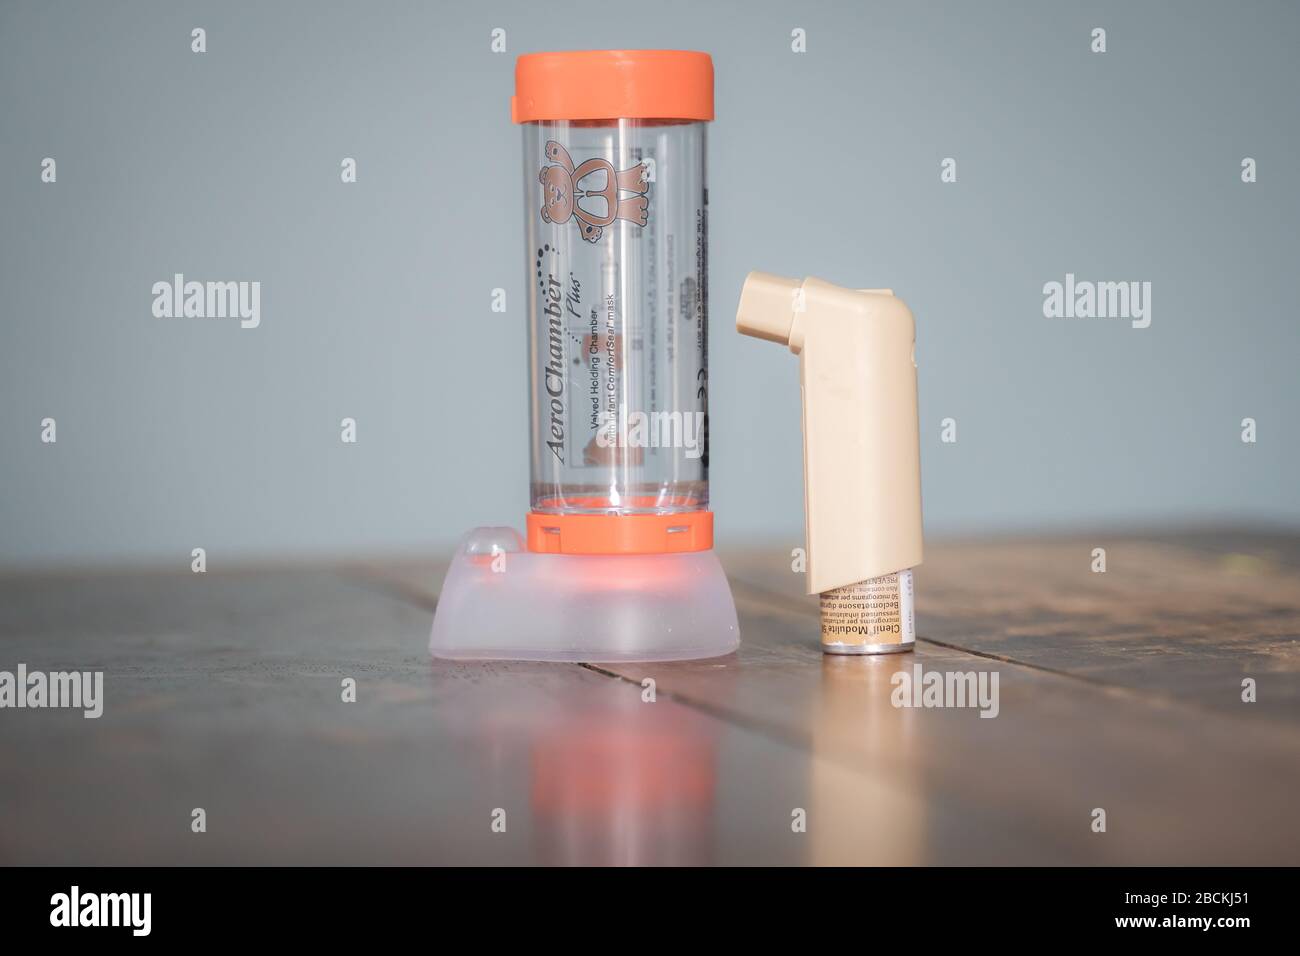 London, UK - April 3, 2020 - Clenil (beclomethasone) inhaler and infant Aerochamber spacer; commonly prescribed medication for asthma treatment Stock Photo